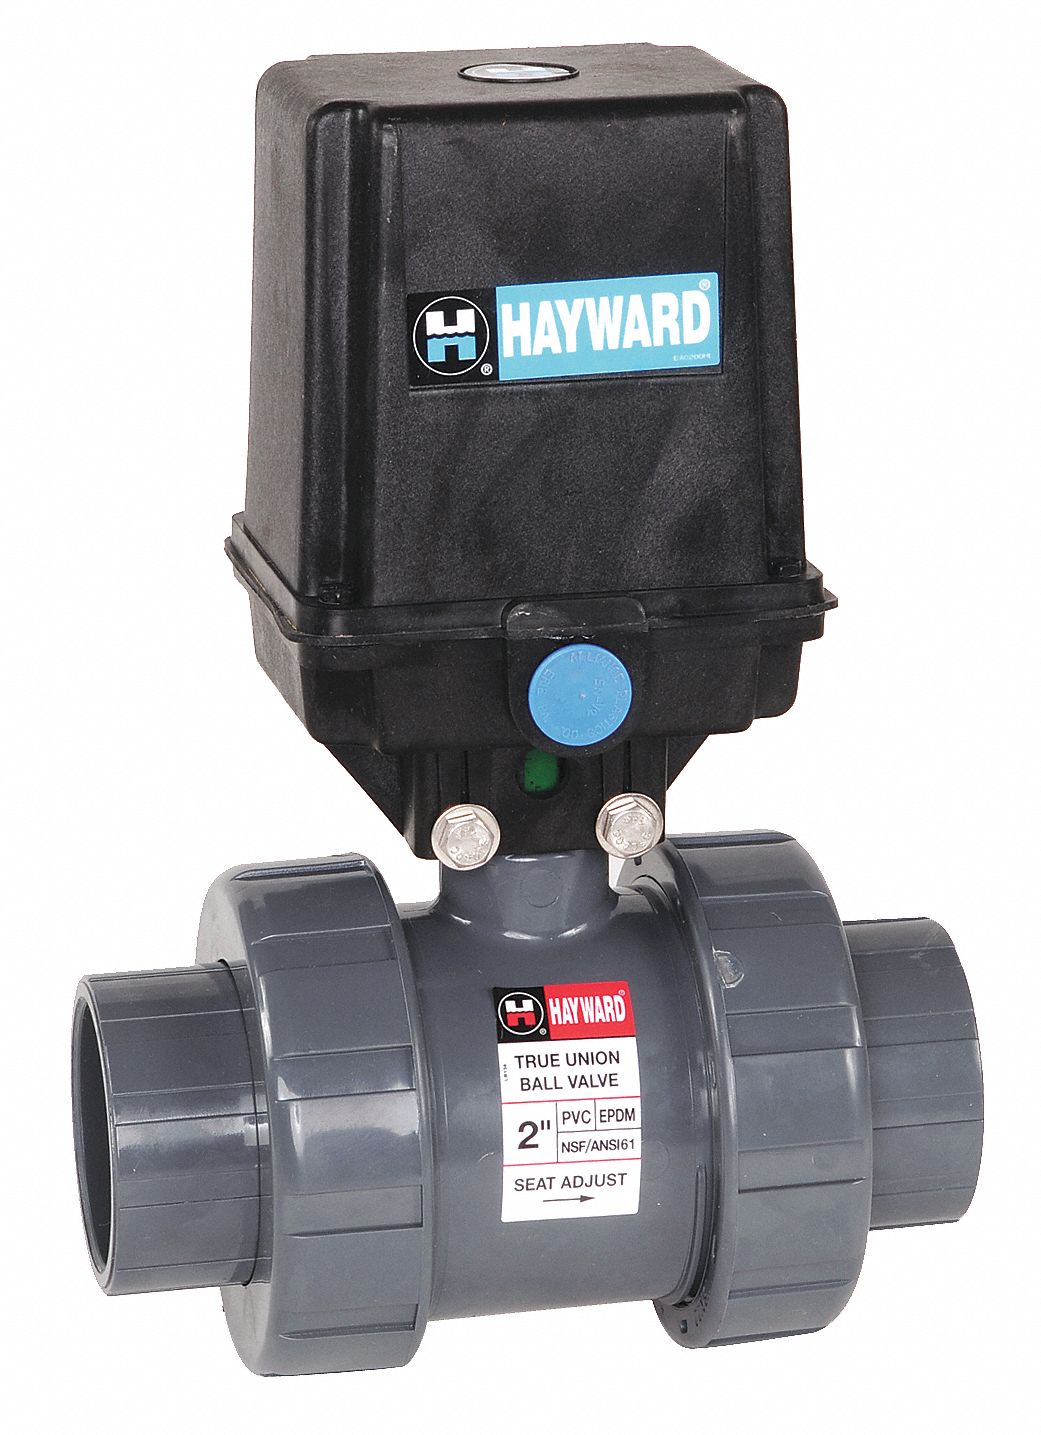 Hayward EATB1200STE PVC Electronic Actuated Ball Valve 2" 120vac for sale online 